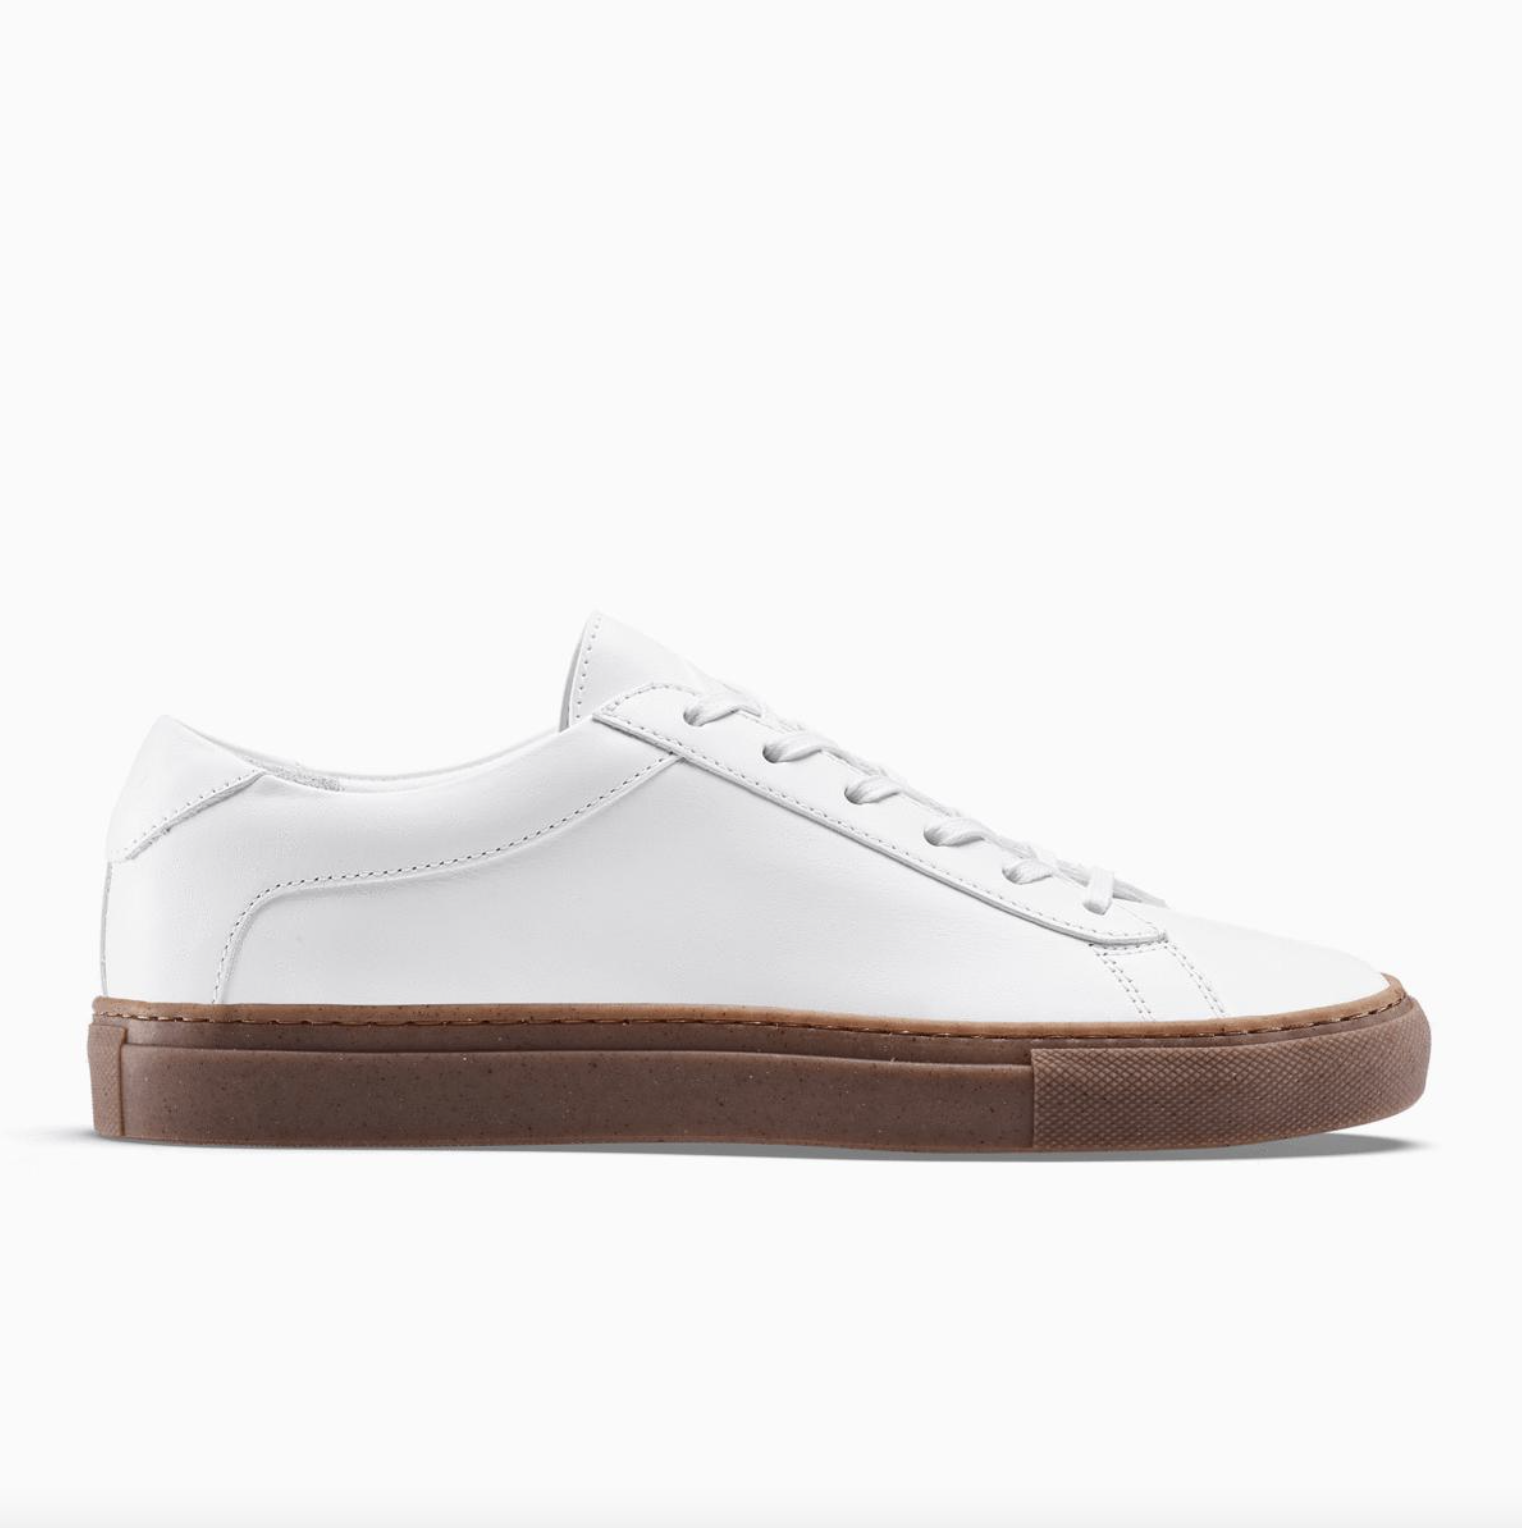 12 Minimal White Sneakers That Match Every Outfit — The Denizen Co.